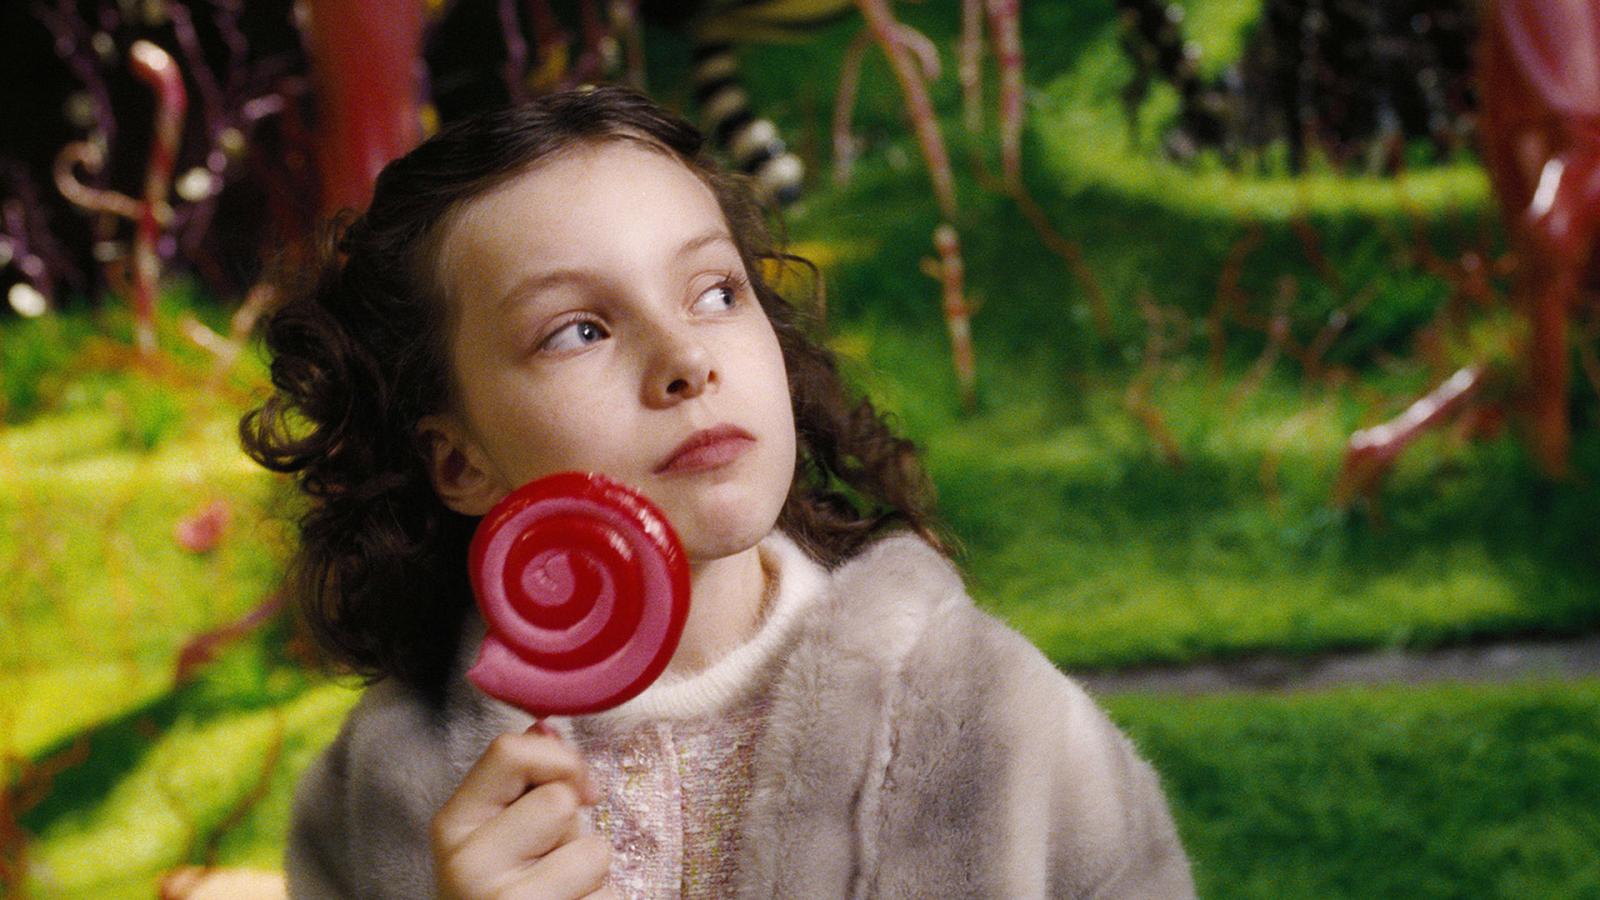 Then & Now: Whatever Happened to the Cast of Charlie and Chocolate Factory? - image 4